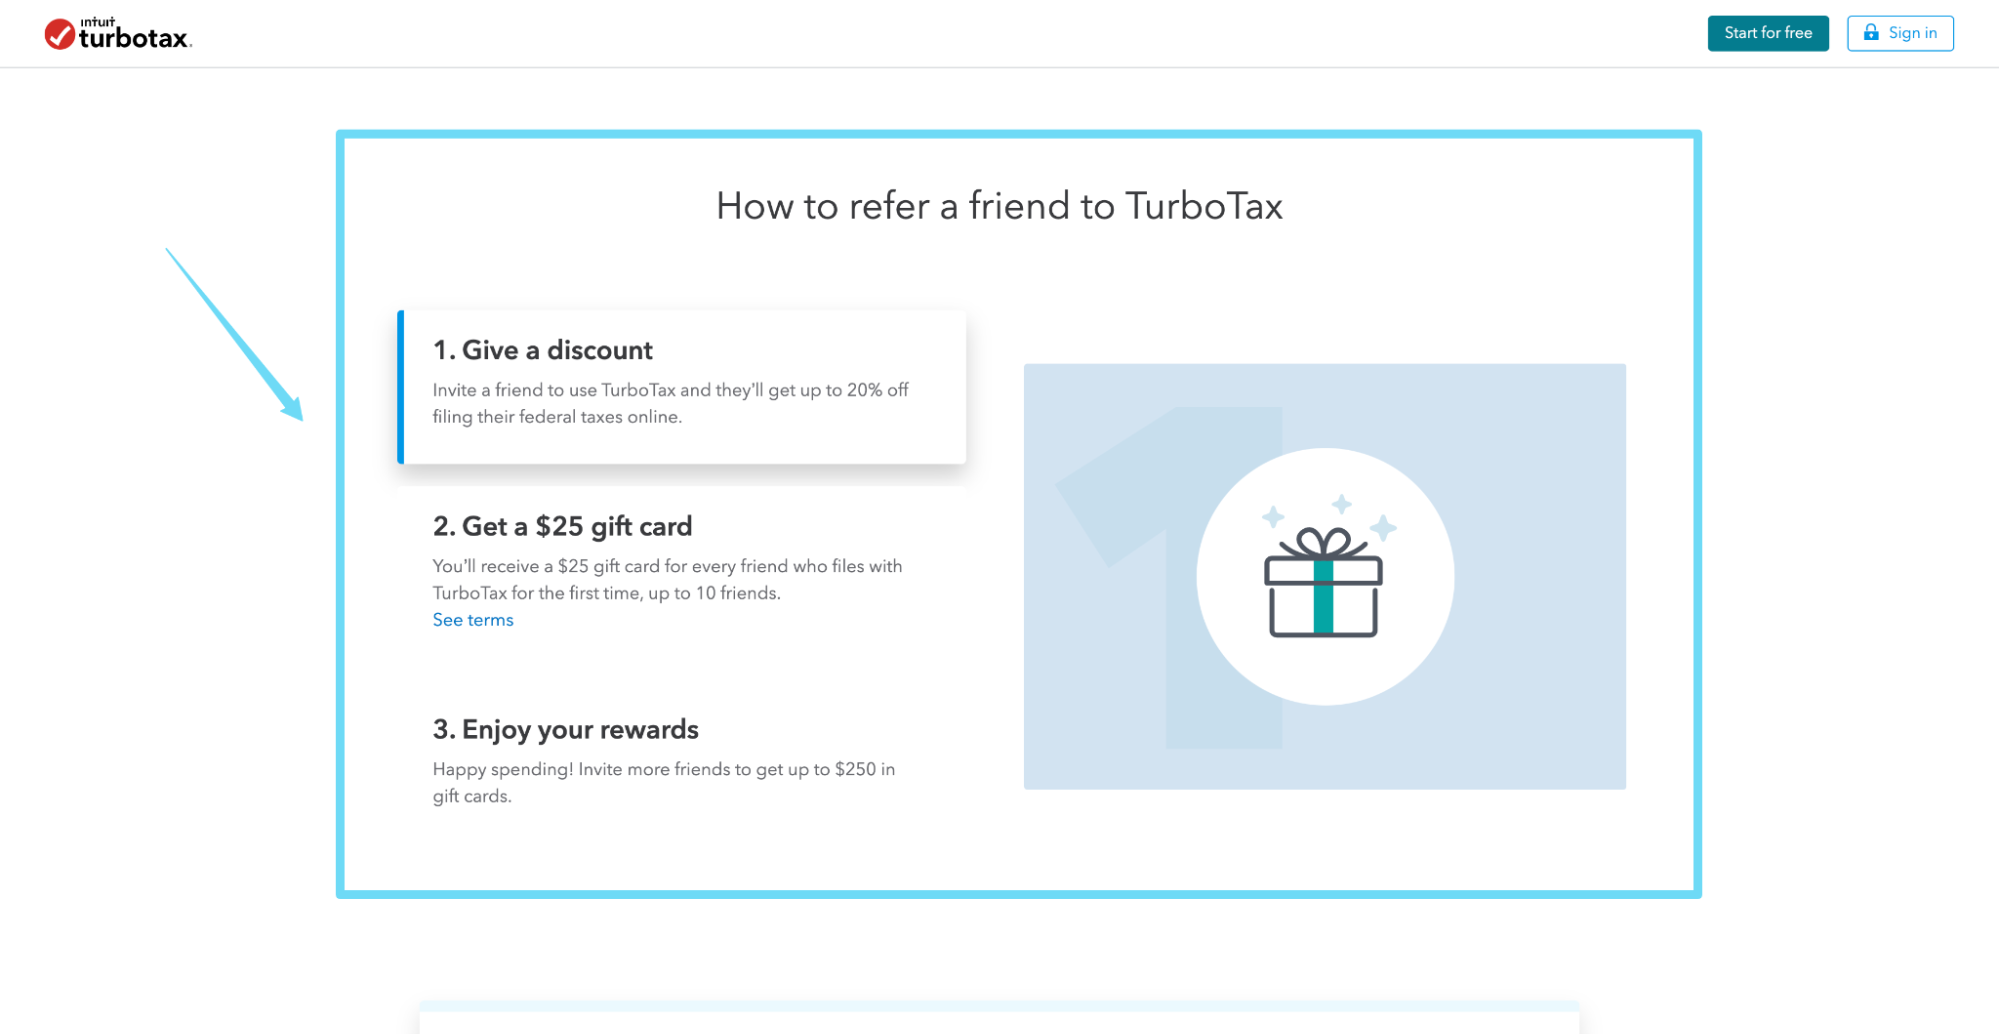 TurboTax “How it works” section